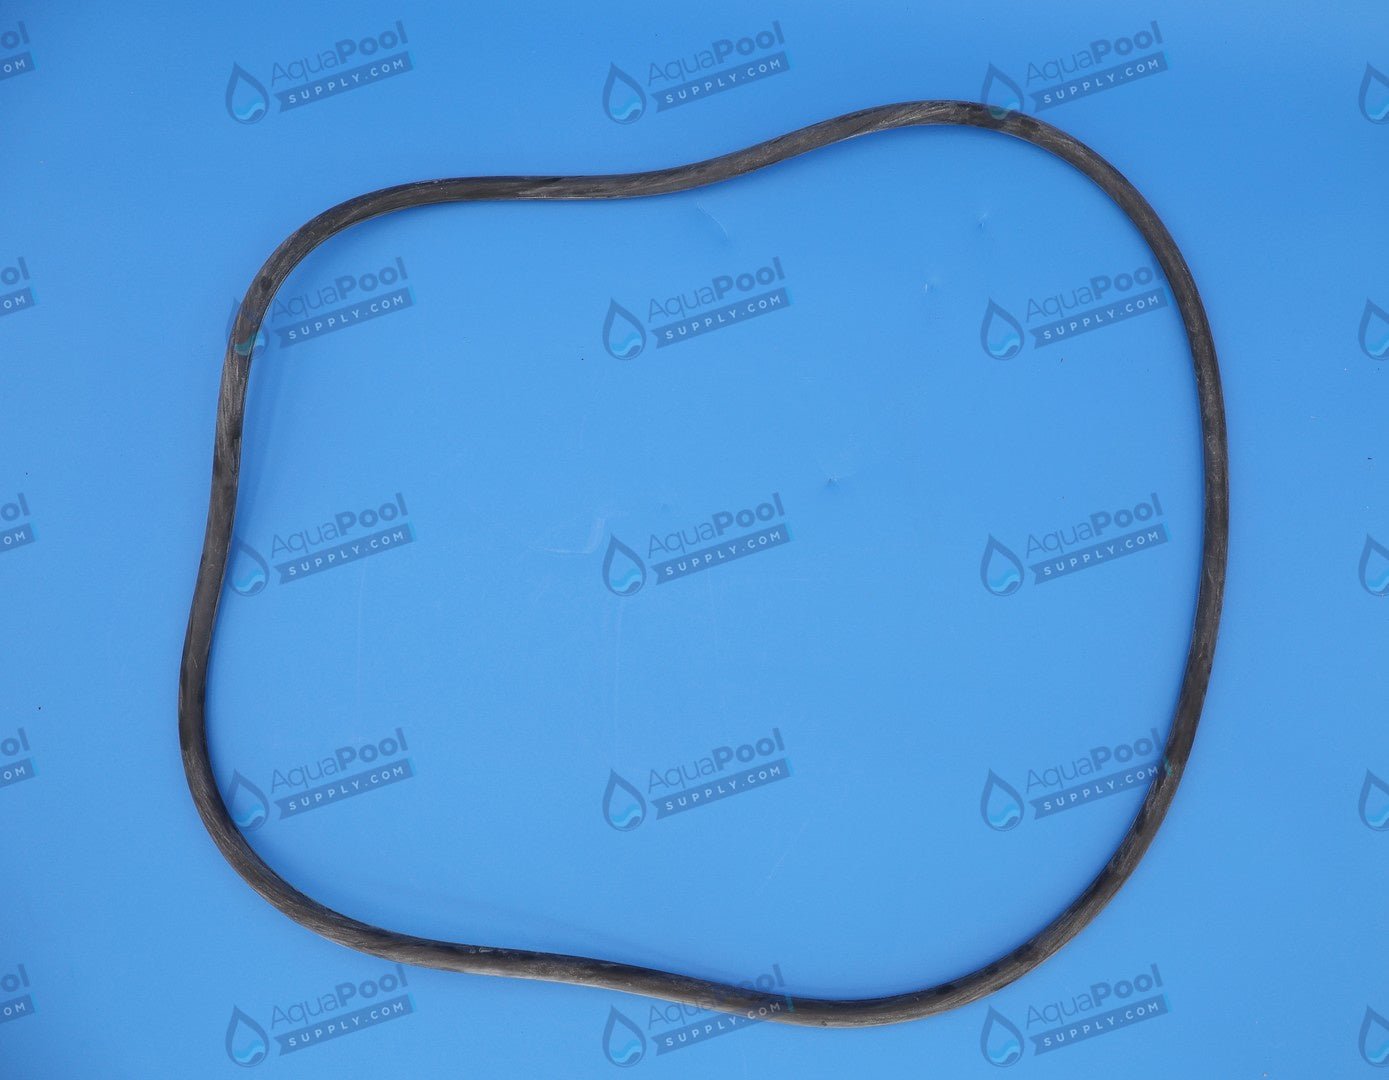 Pentair Clean and Clear® Plus and FNS Tank O-Ring 39010200z - Pool Filter Parts